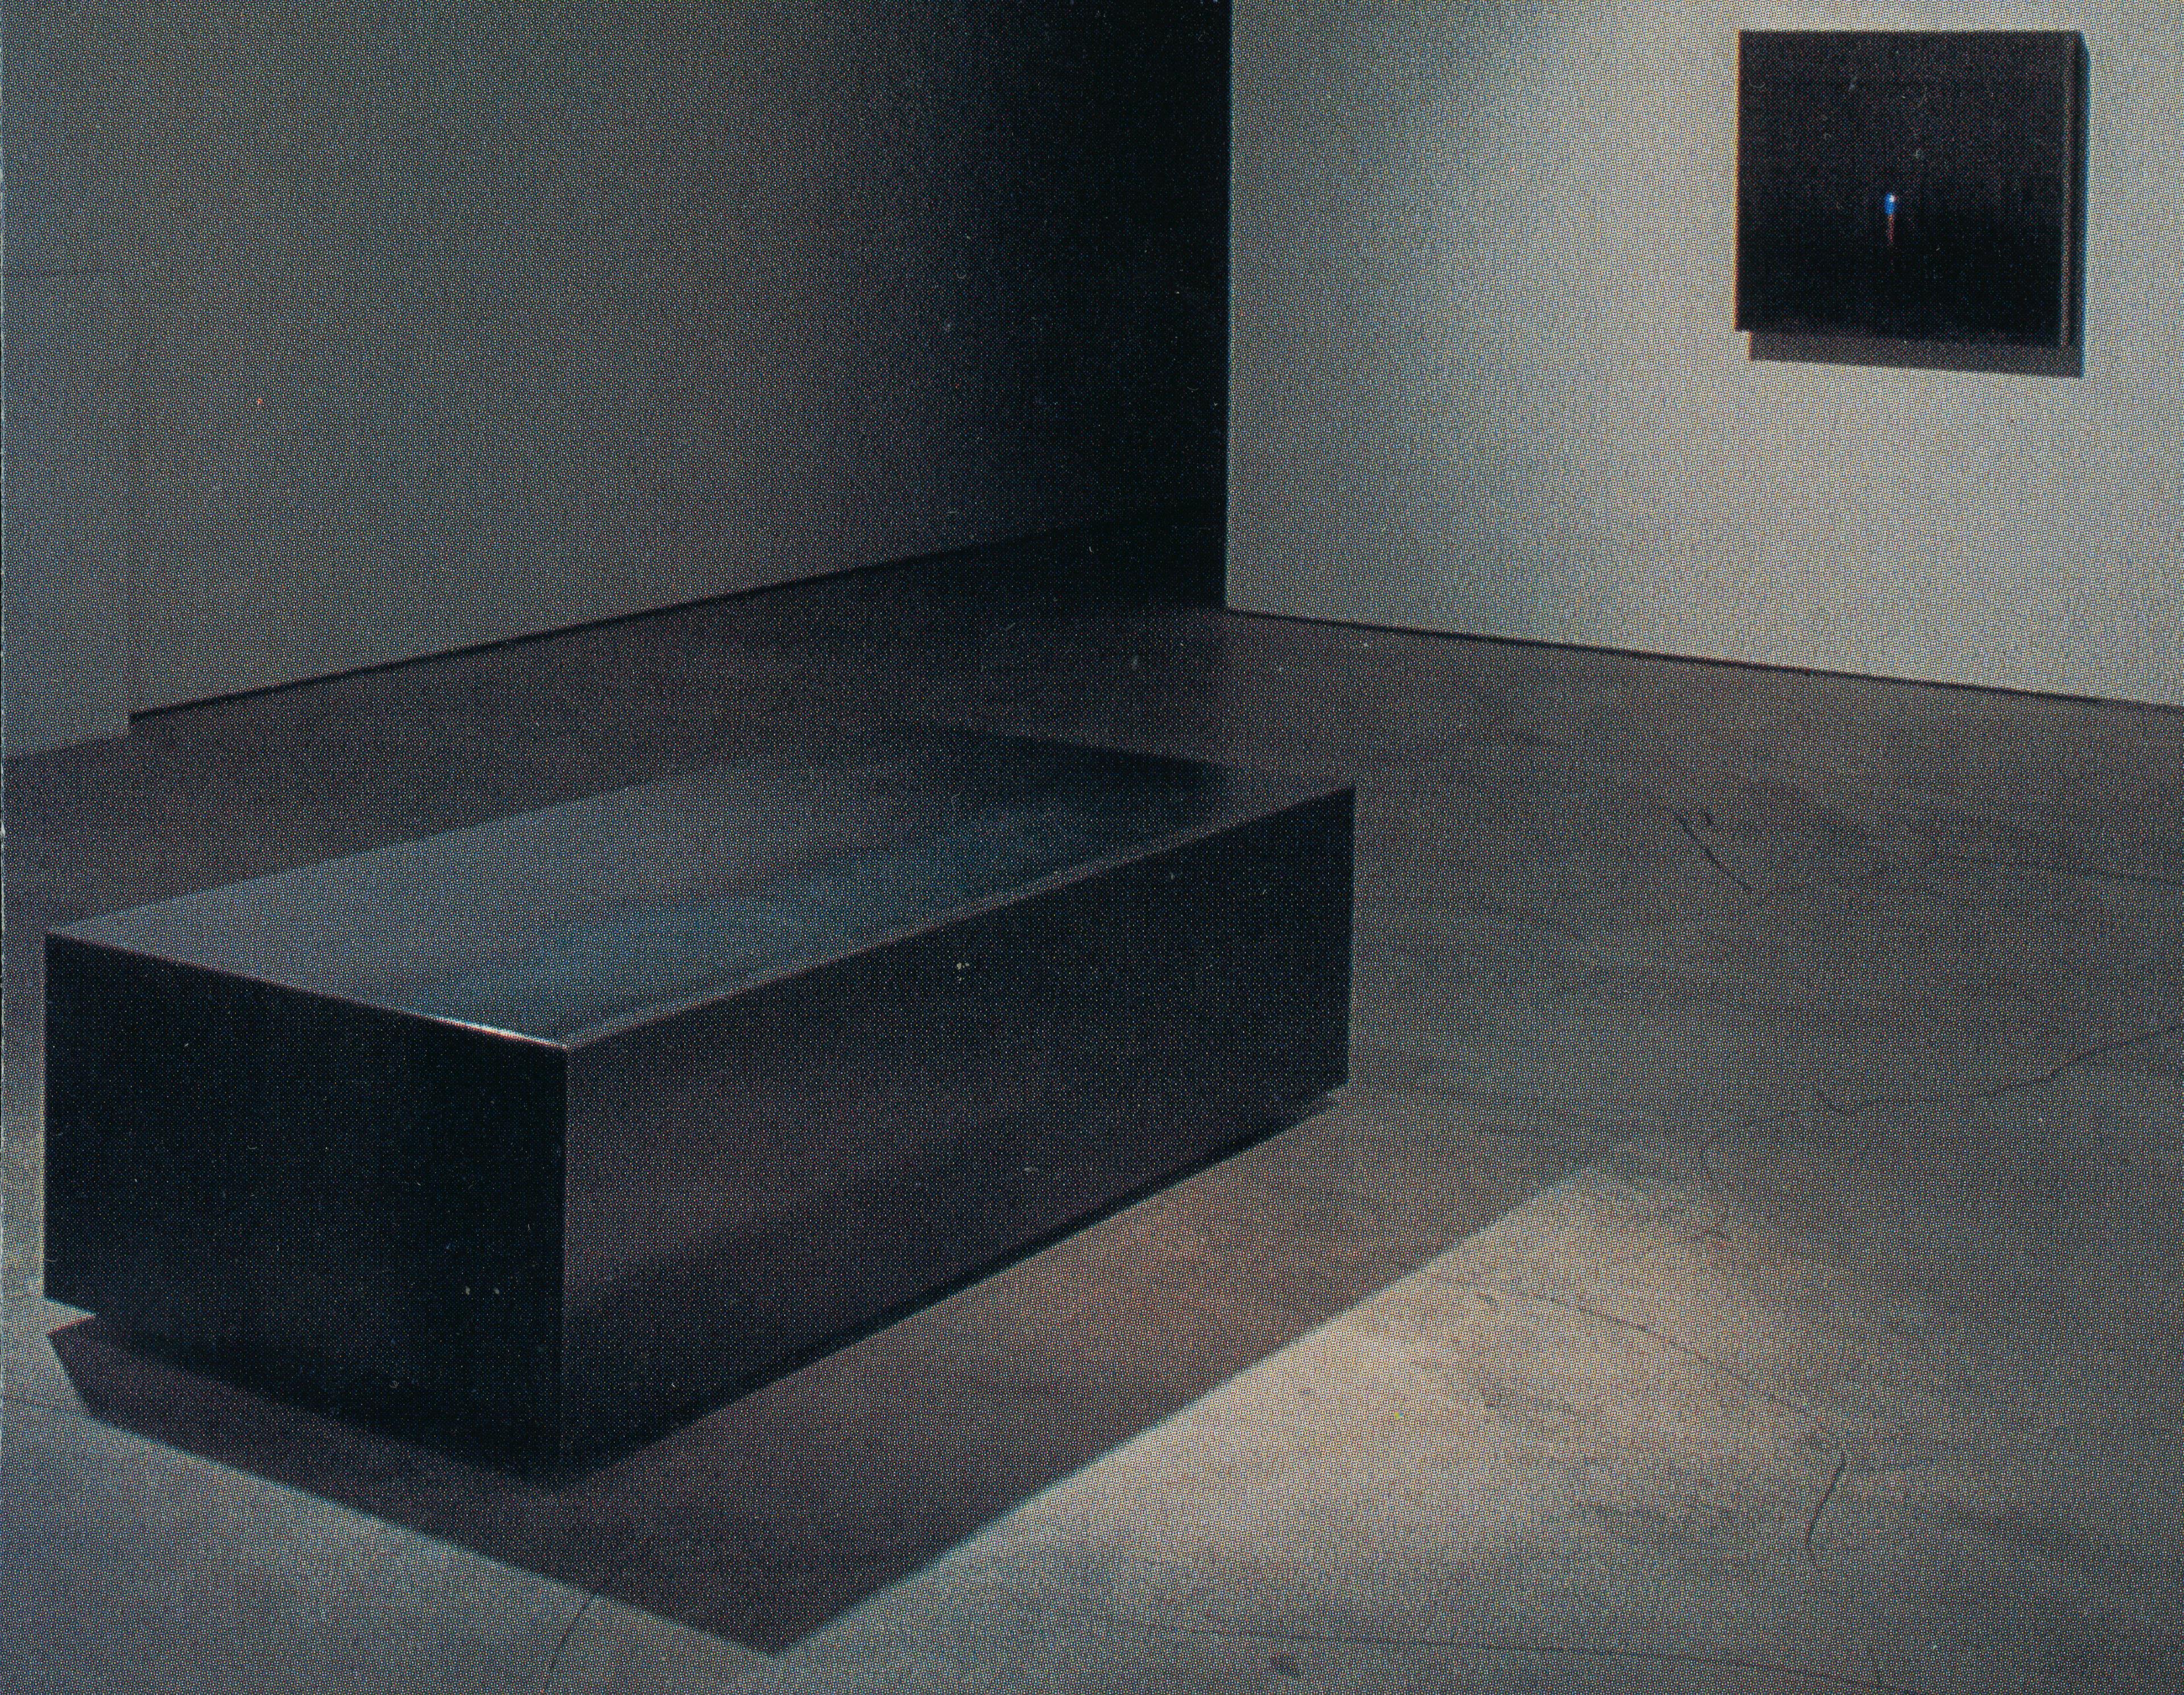 A large steel-made sculpture is placed in the middle of the dimly lit gallery. It is rectangular and has a tarnished dark grey colour. The sculpture is directly placed on the floor. 